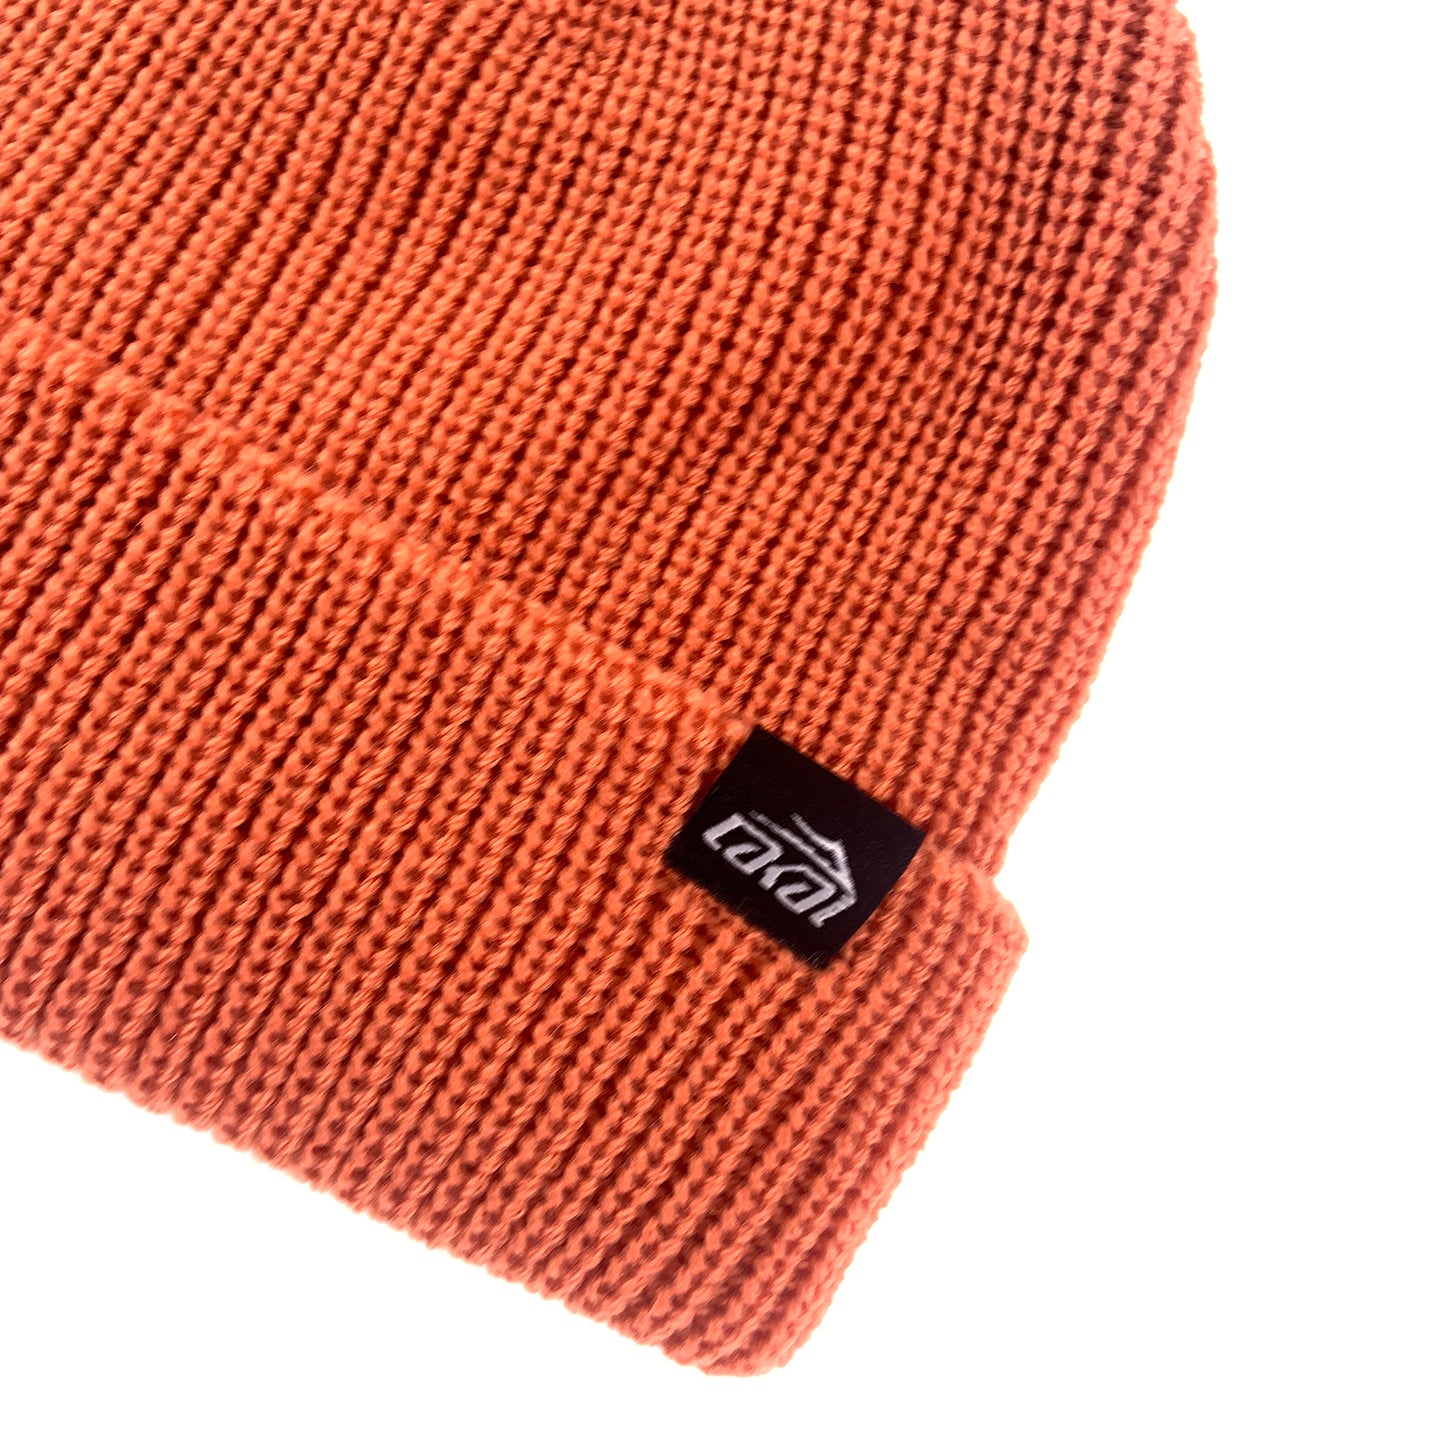 Lakai Watch Beanie - Muted Red - Prime Delux Store